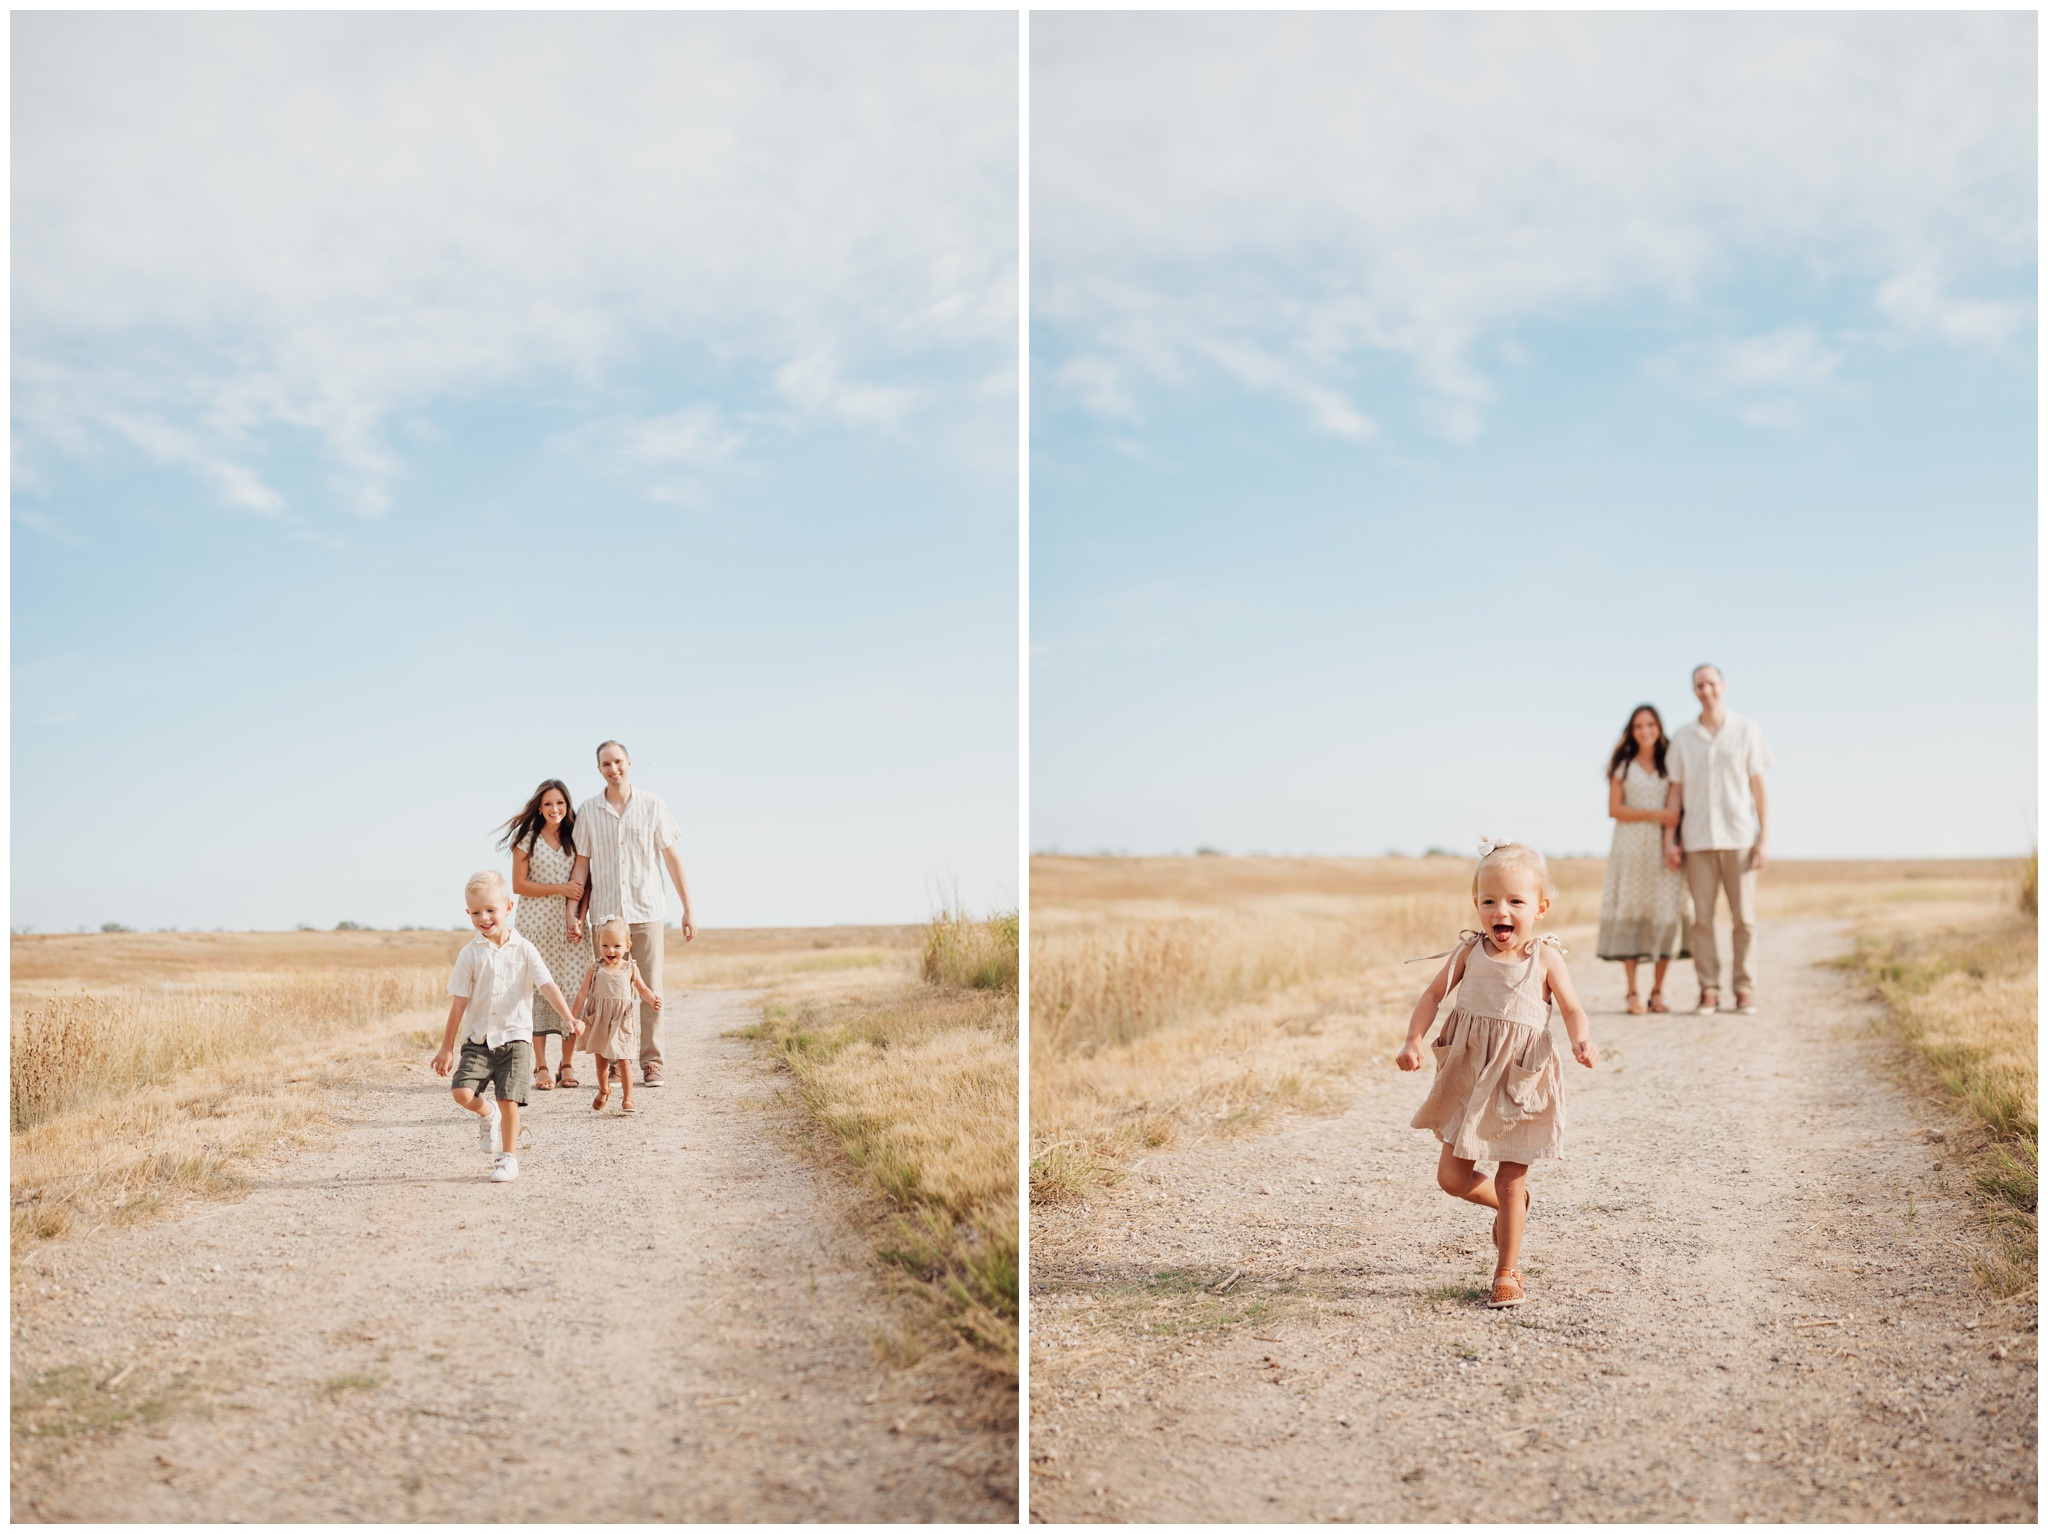 Toddlers running around during family pictures taken in Lubbock Texas